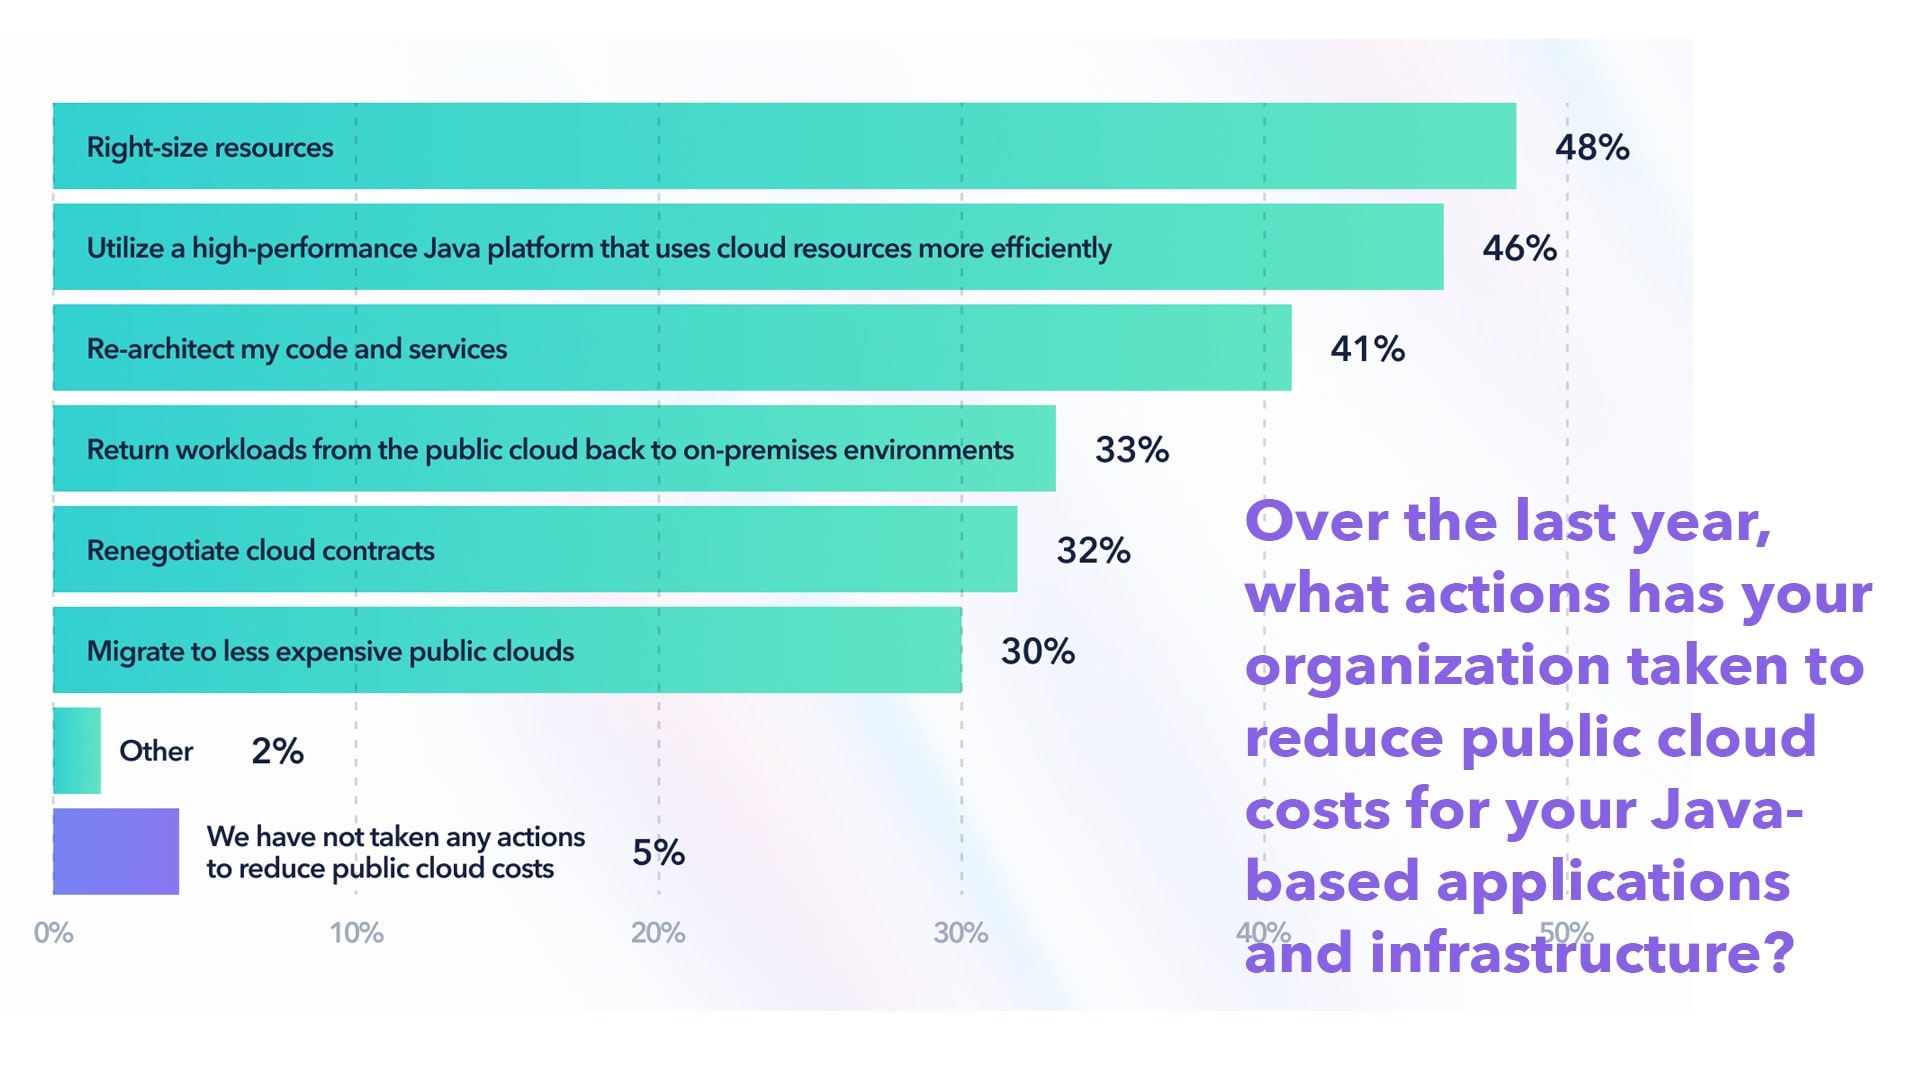 Over the last year, what actions has your organization taken to reduce public cloud costs for your Java-based applications and infrastructure? (multi-select)​